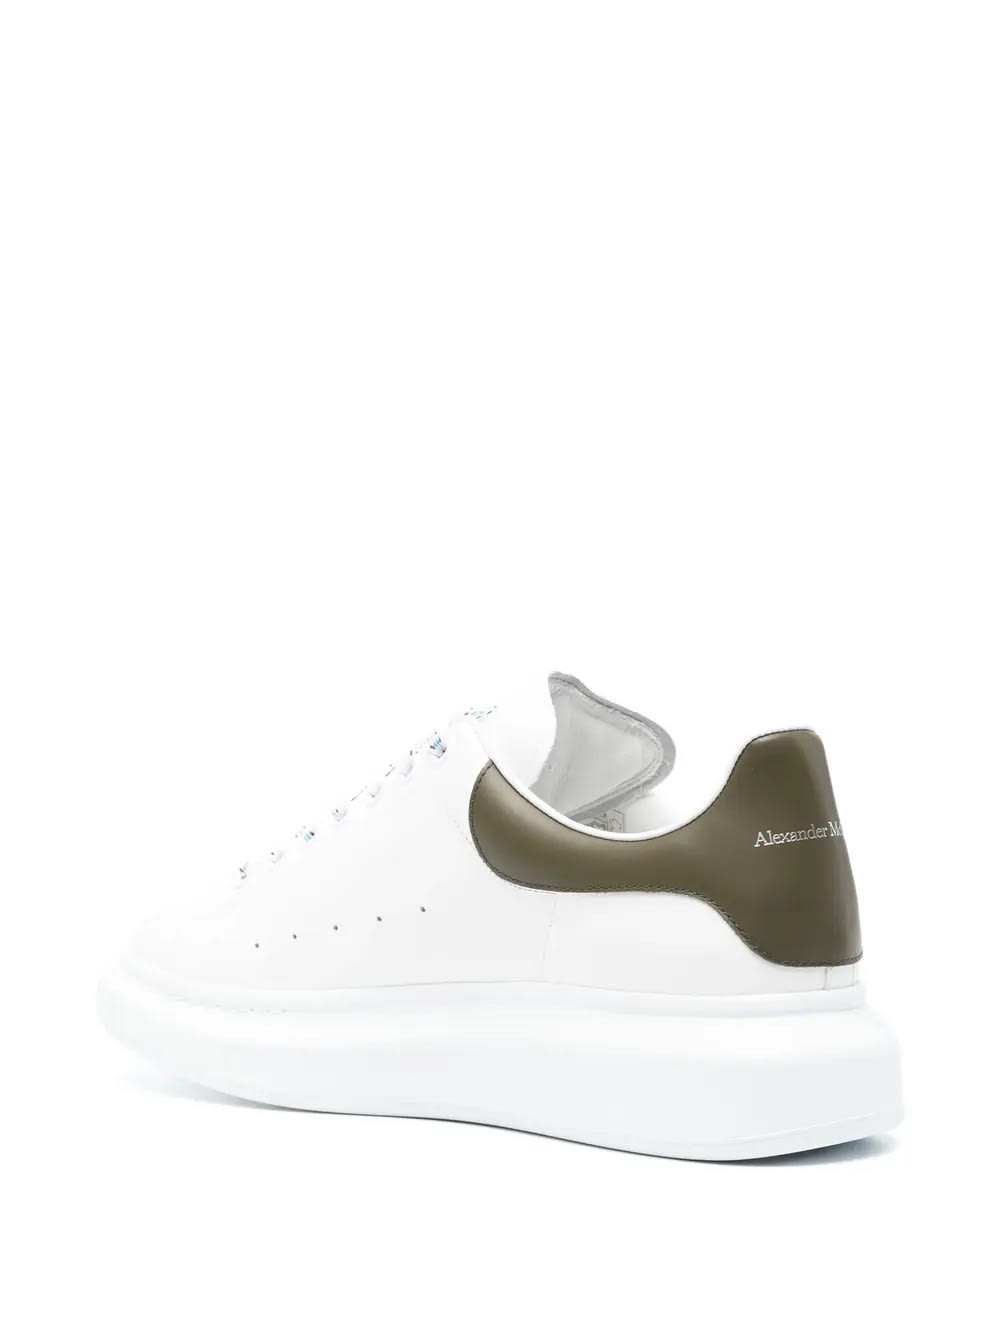 Shop Alexander Mcqueen Oversized Sneakers In White And Khaki Green